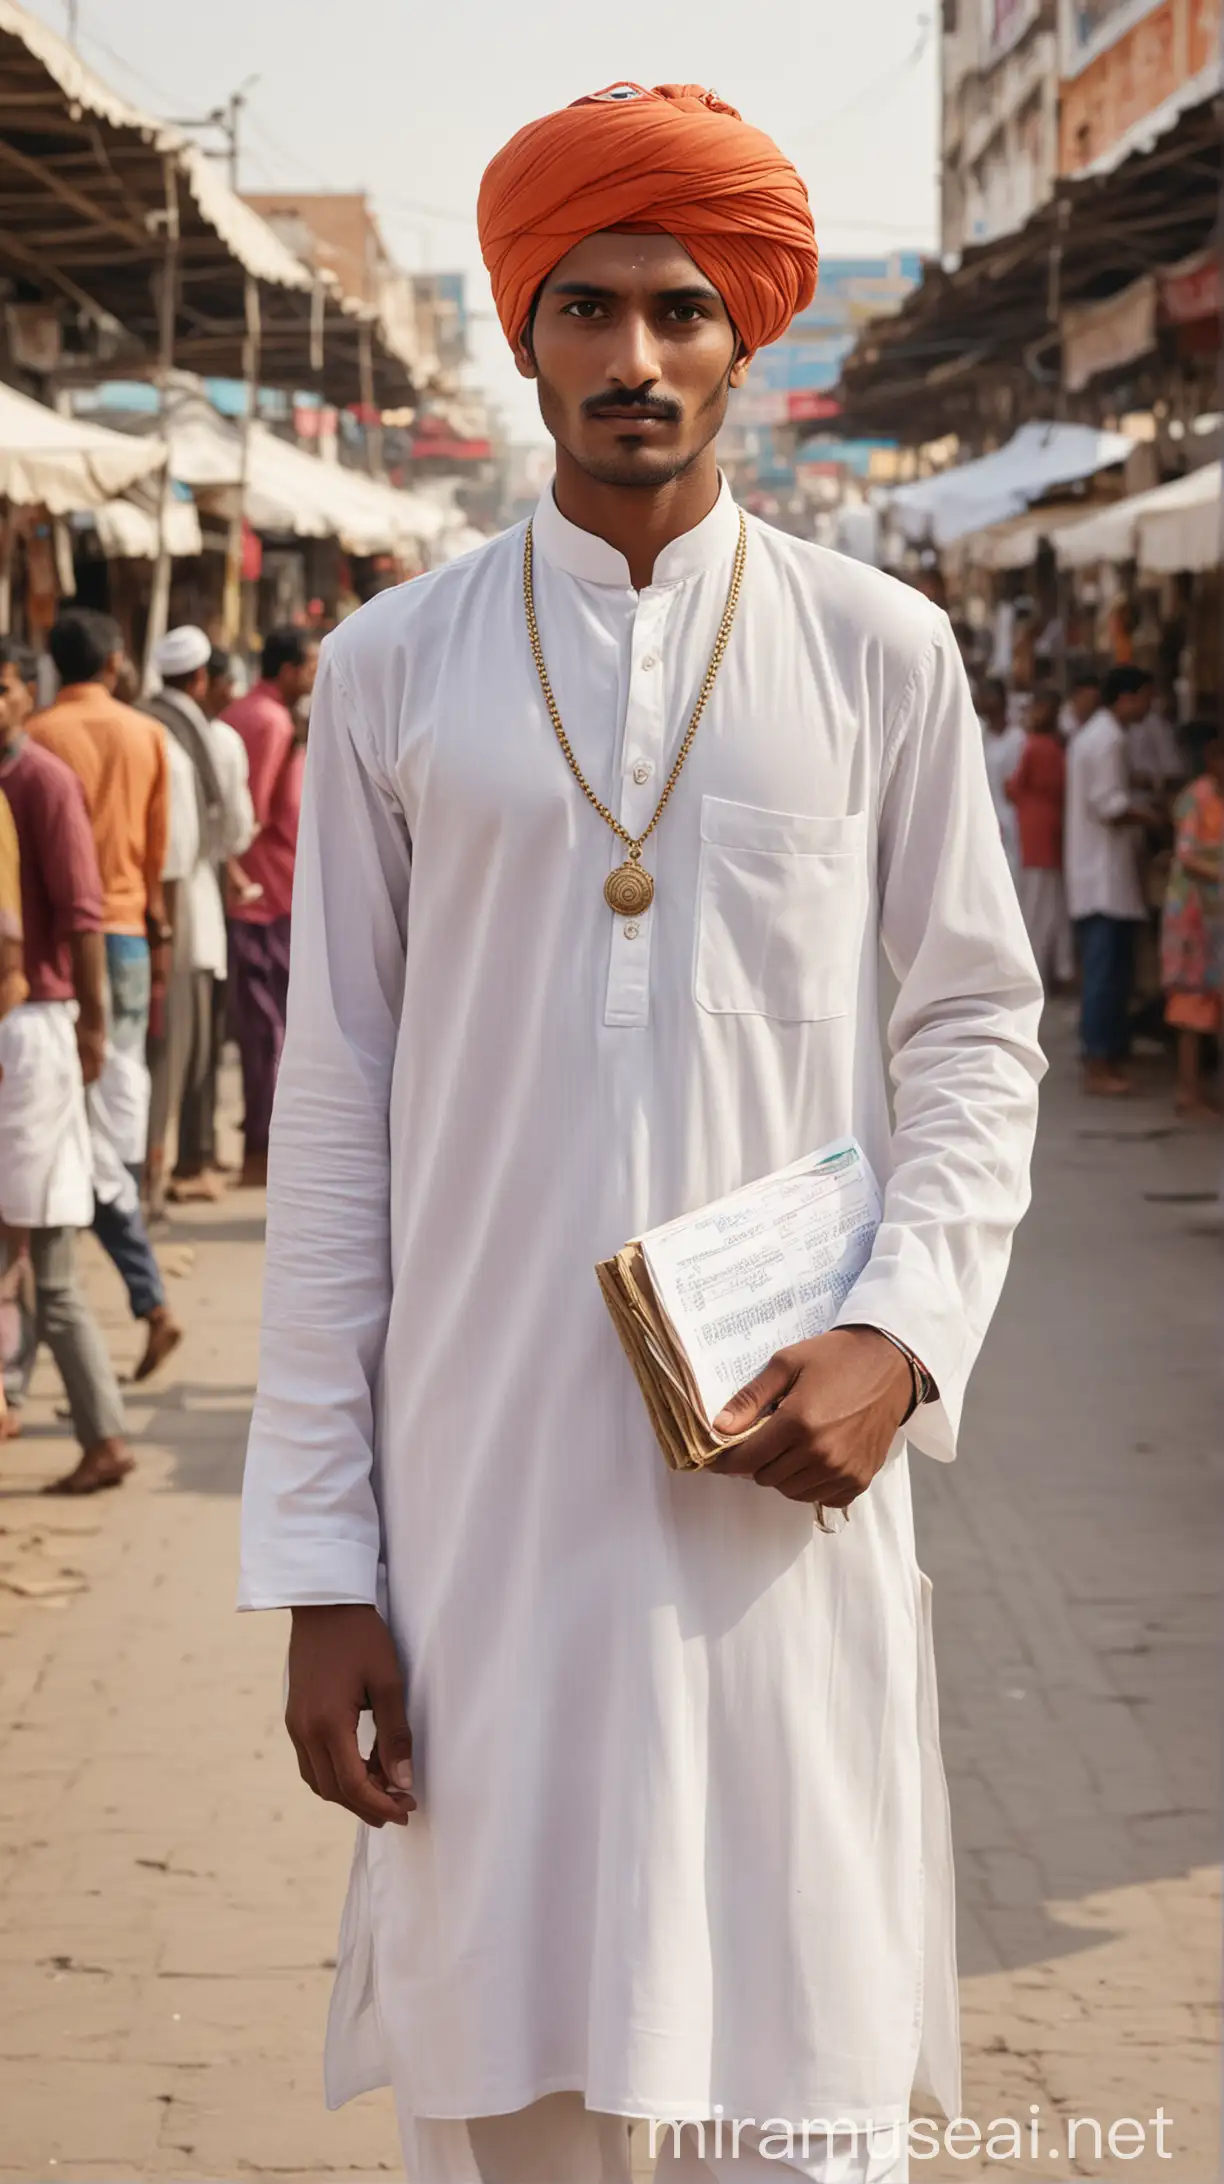 1980 Rajasthani Businessman in Traditional Attire with Ledger in Market